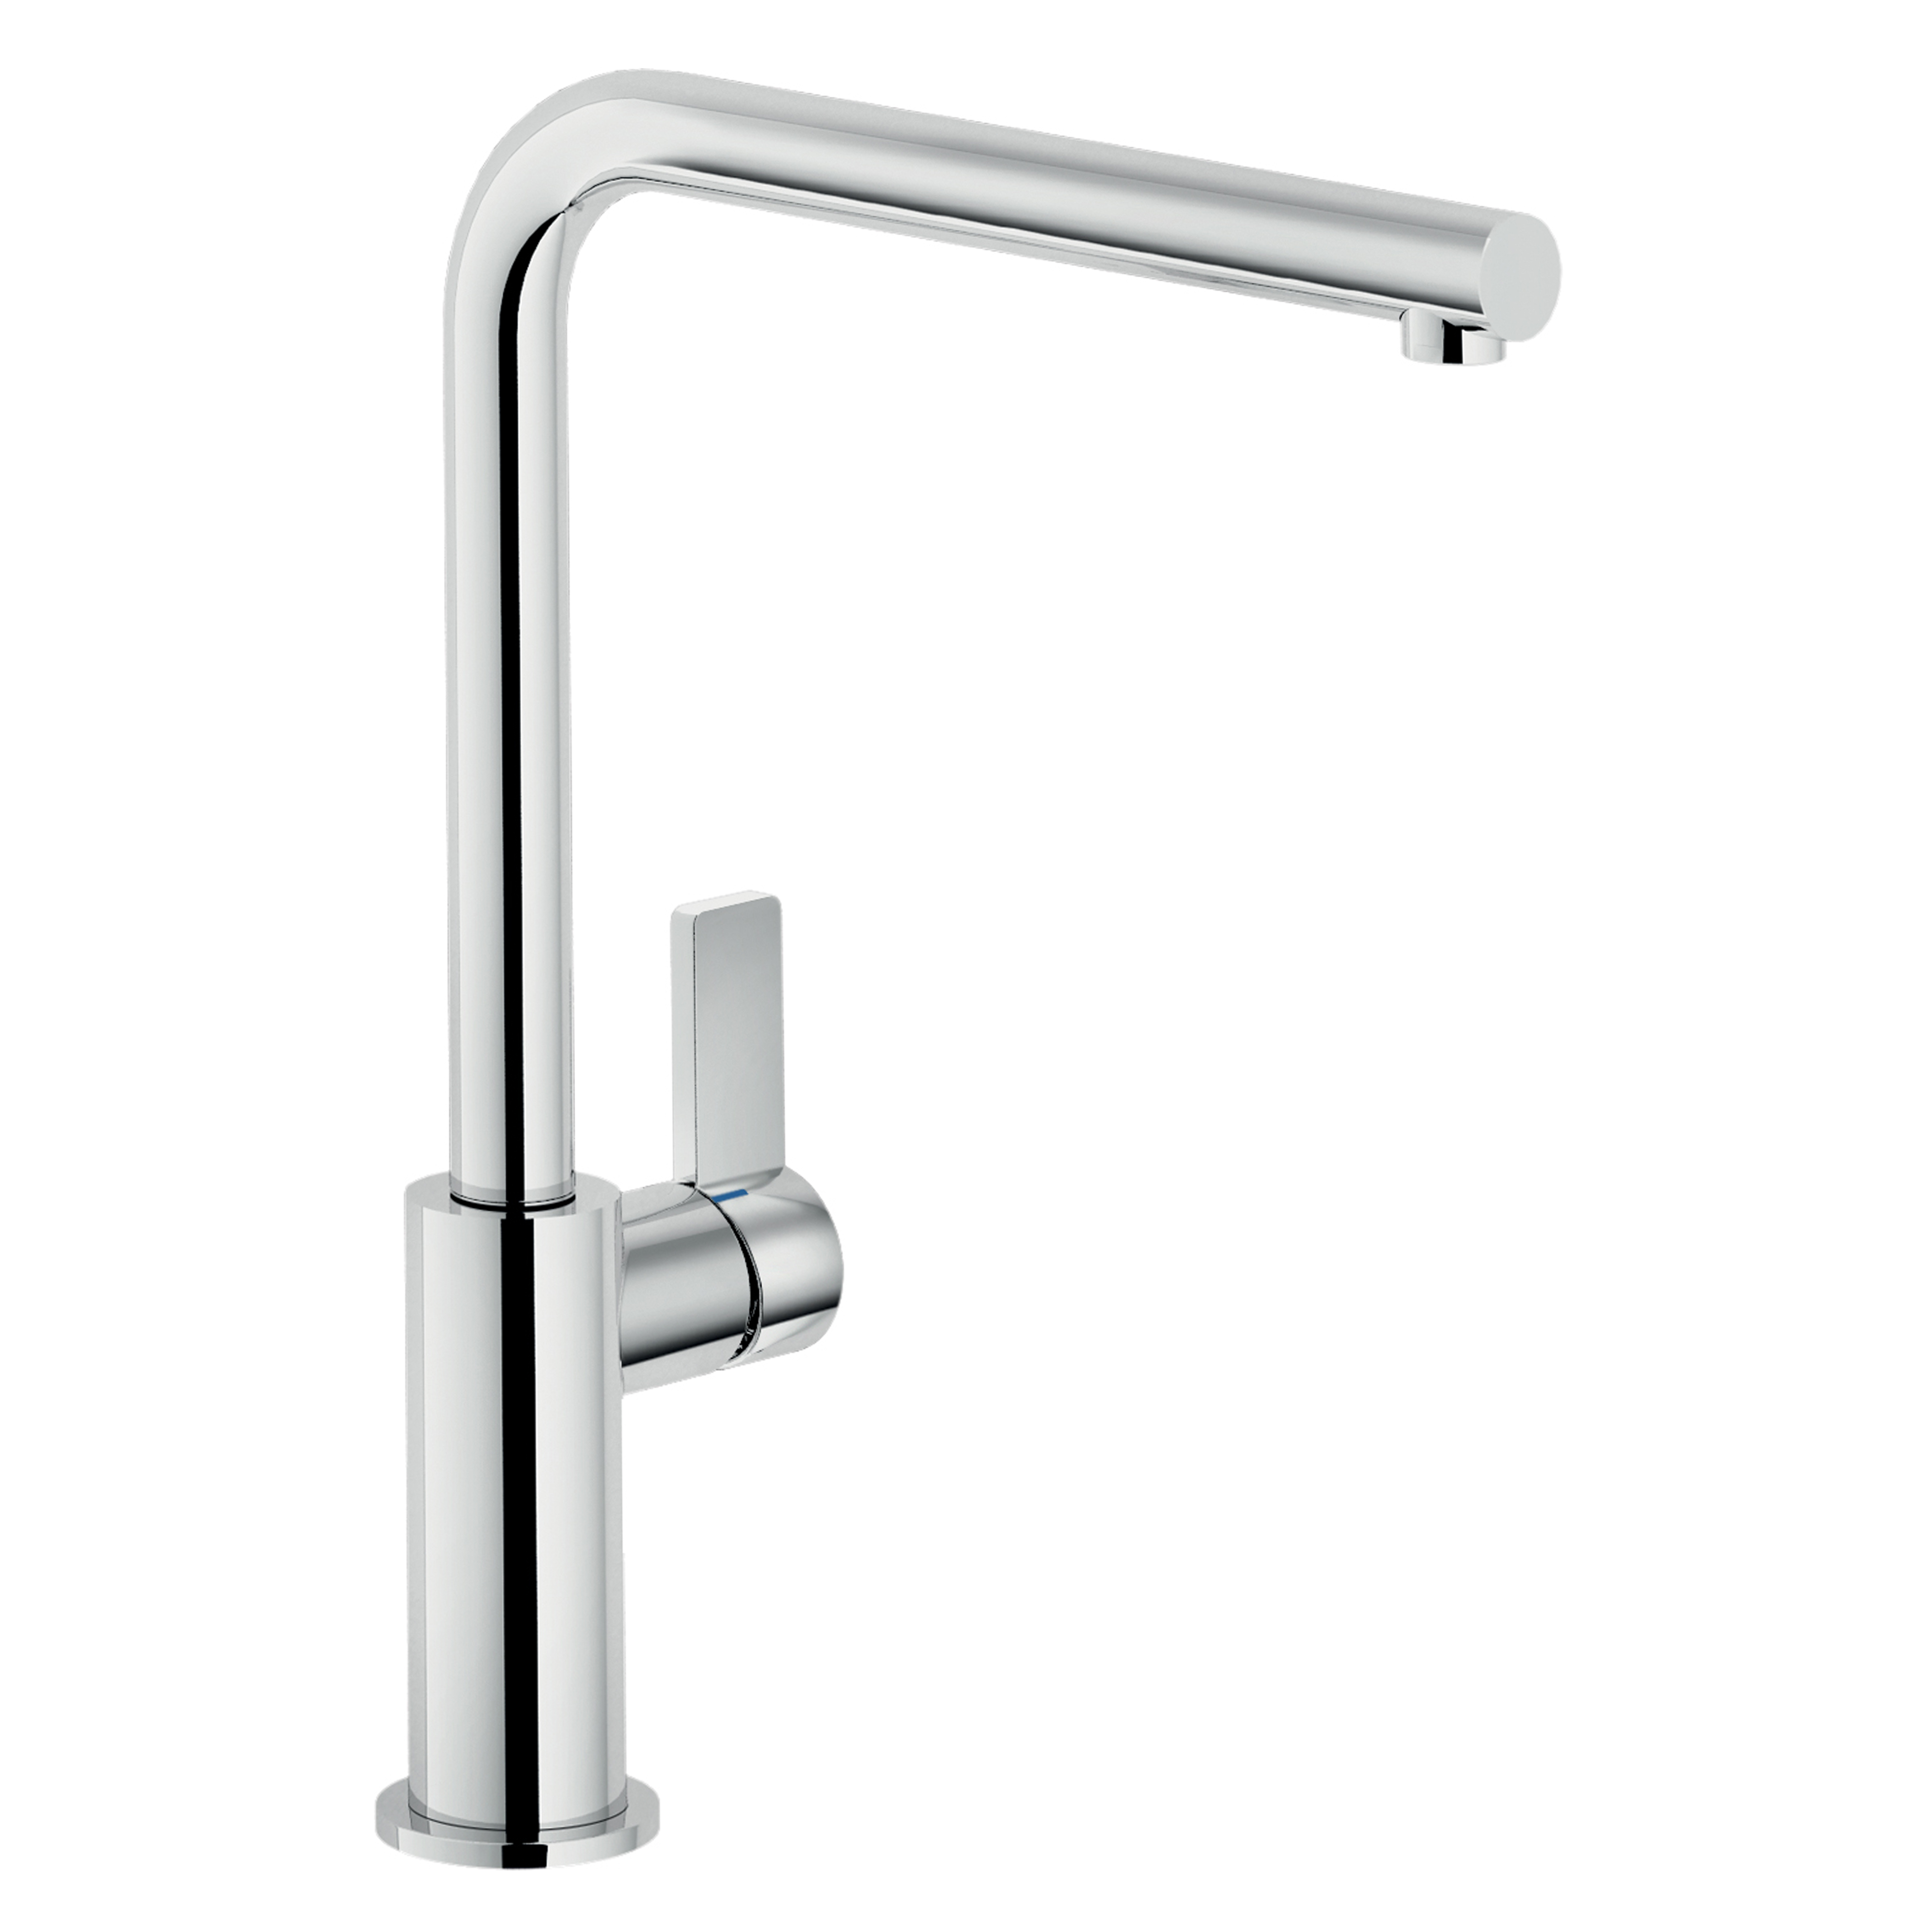 GRIFEMA G4009 Kitchen Tap with Swivel Spout, Cold-Start Sink Mixer